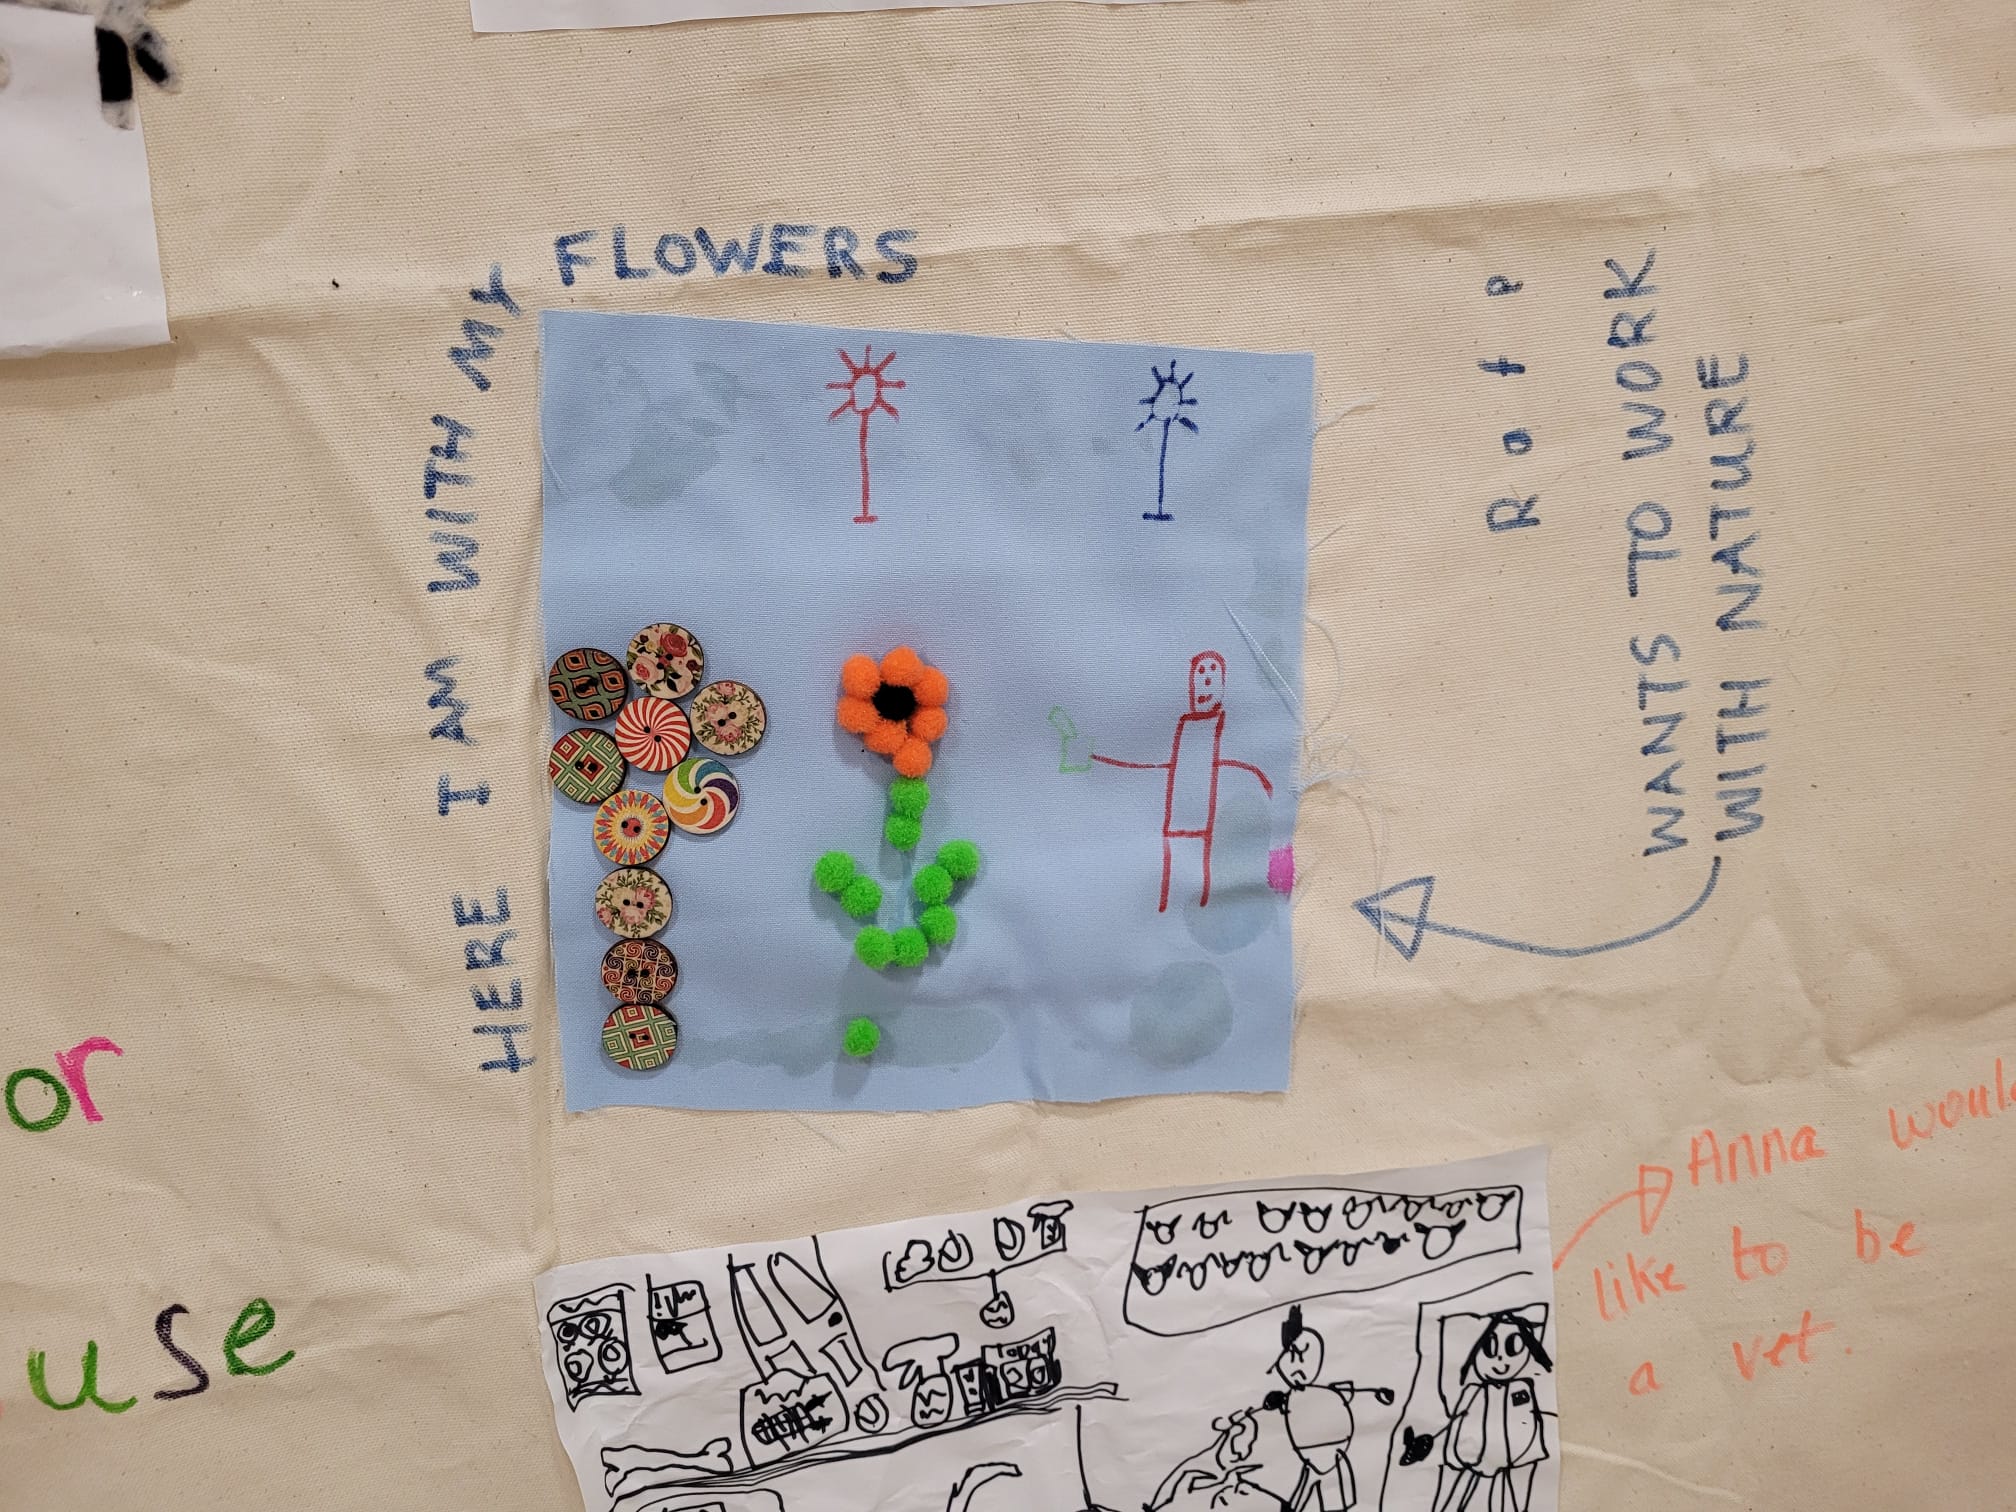 Collage on blue fabric of buttons and pompoms arranged to form flower shapes. Next to them a drawing of a person watering the flowers. Text reads "Here I am with my flowers. Rafe wants to work with nature."